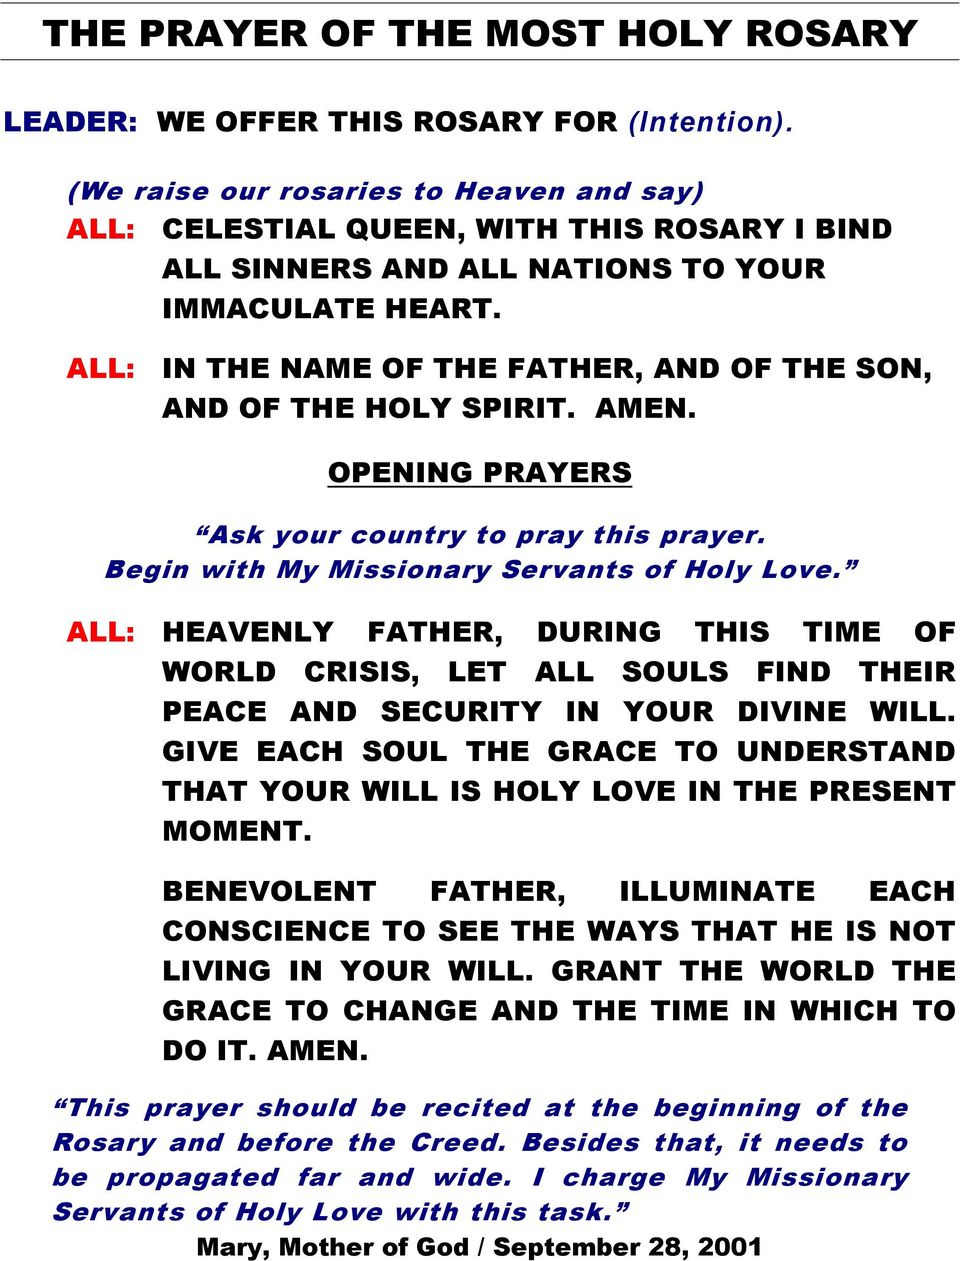 IN THE NAME OF THE FATHER, AND OF THE SON, AND OF THE HOLY SPIRIT. AMEN. OPENING PRAYERS Ask your country to pray this prayer. Begin with My Missionary Servants of Holy Love.